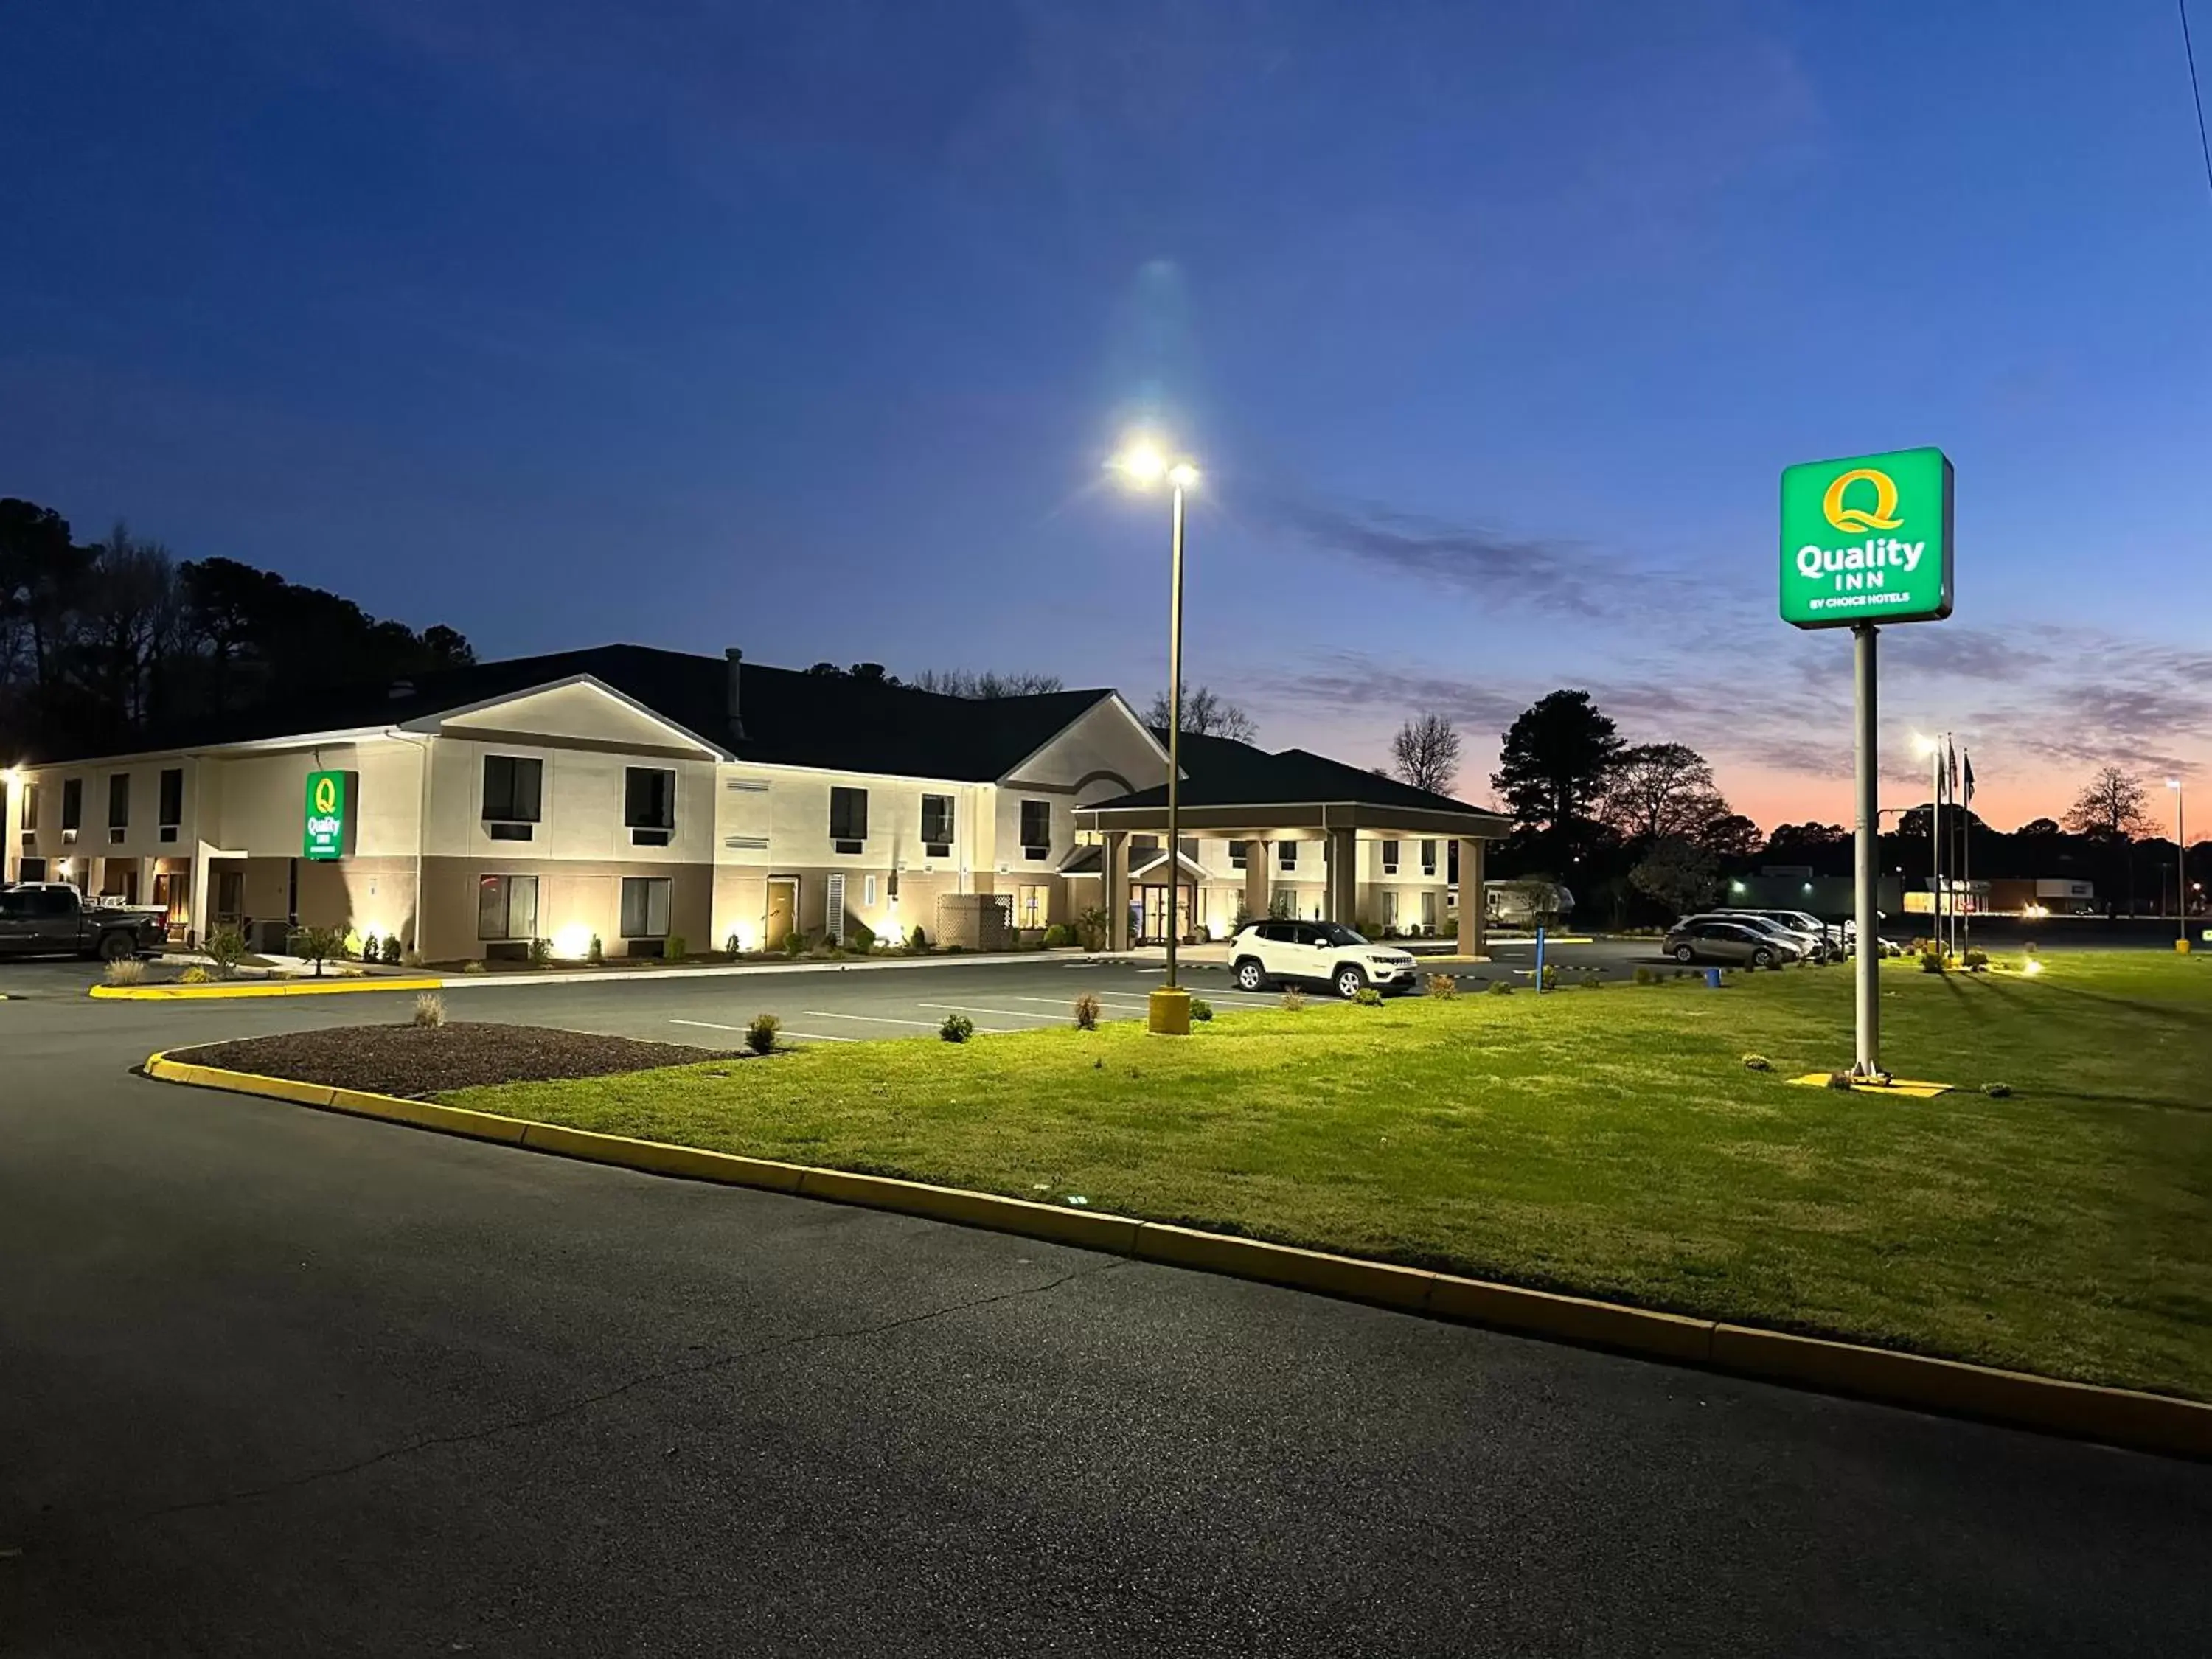 Property Building in Quality Inn & Suites Exmore